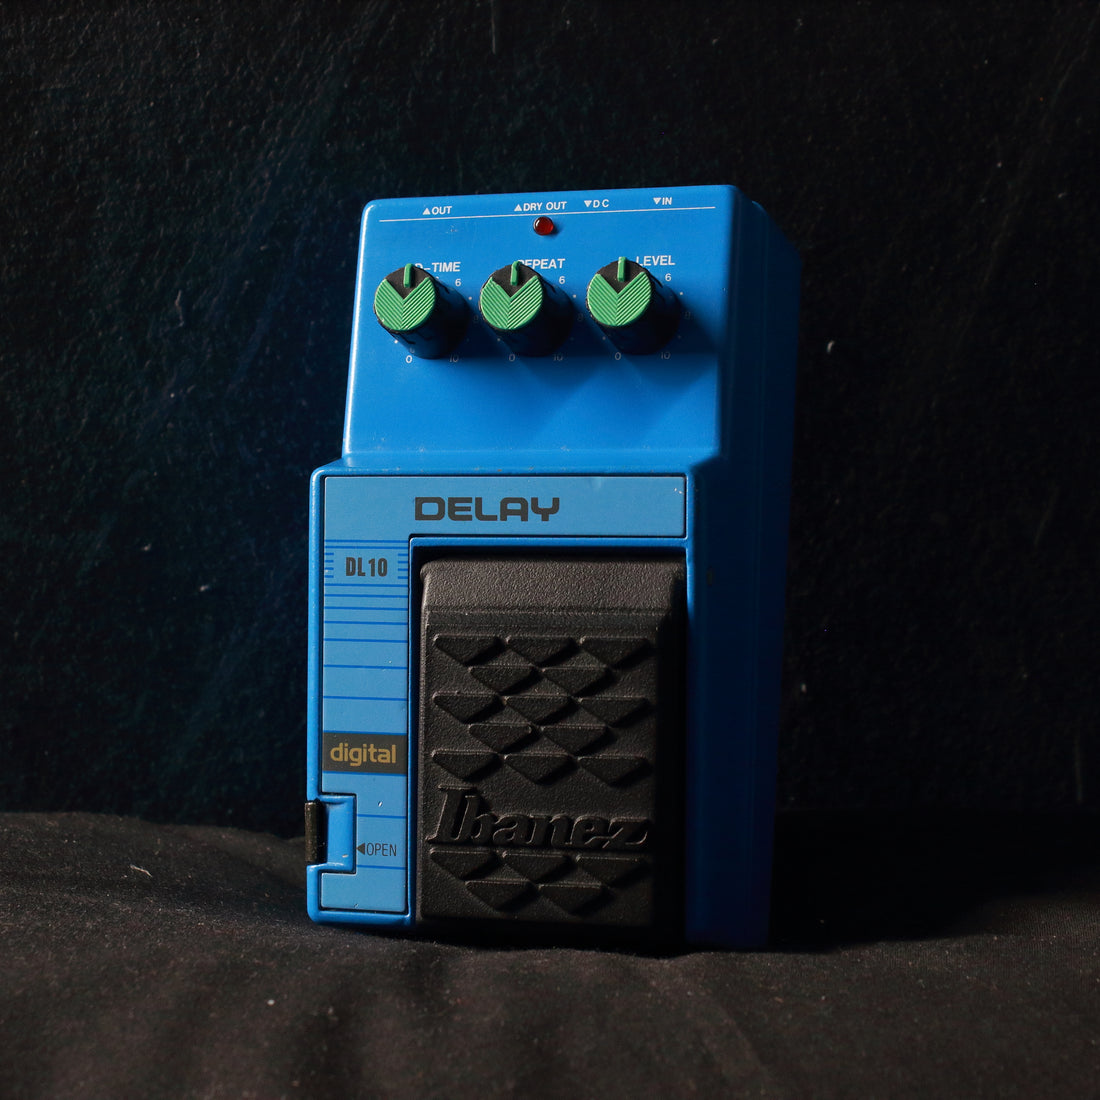 Ibanez DL10 Delay Pedal